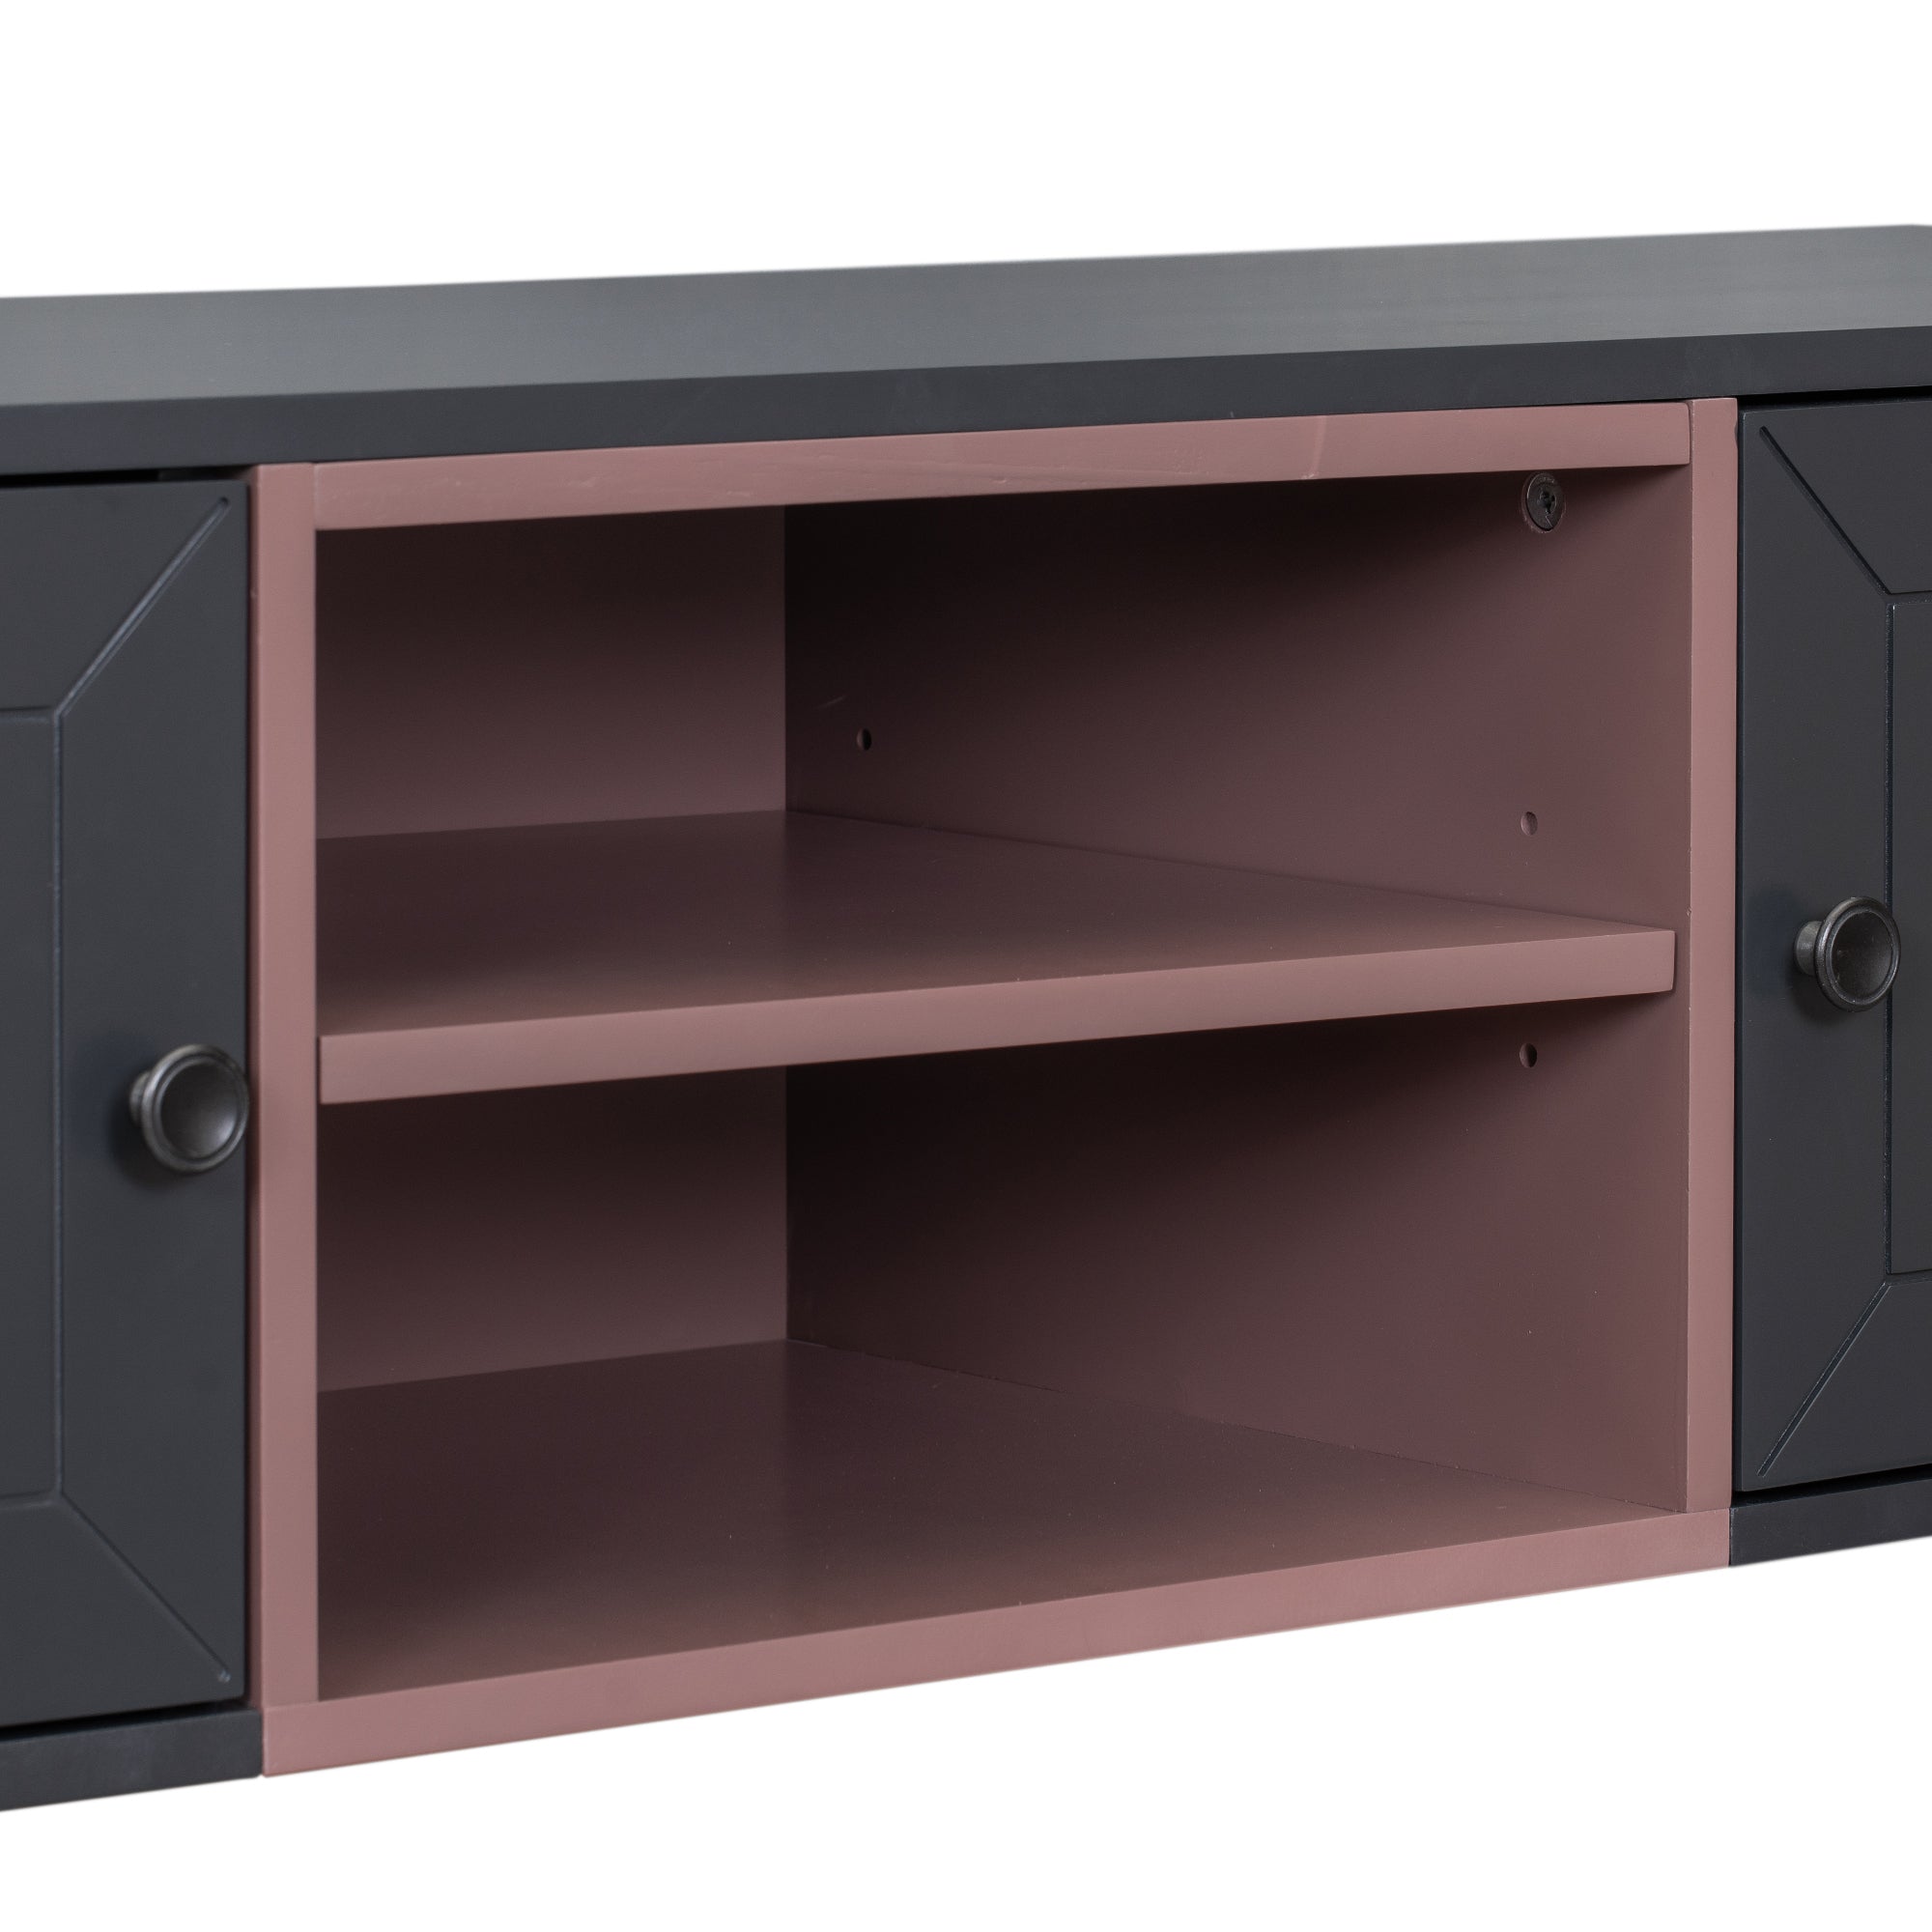 Wall Mounted 65" Floating TV Stand with Large Storage black-mdf